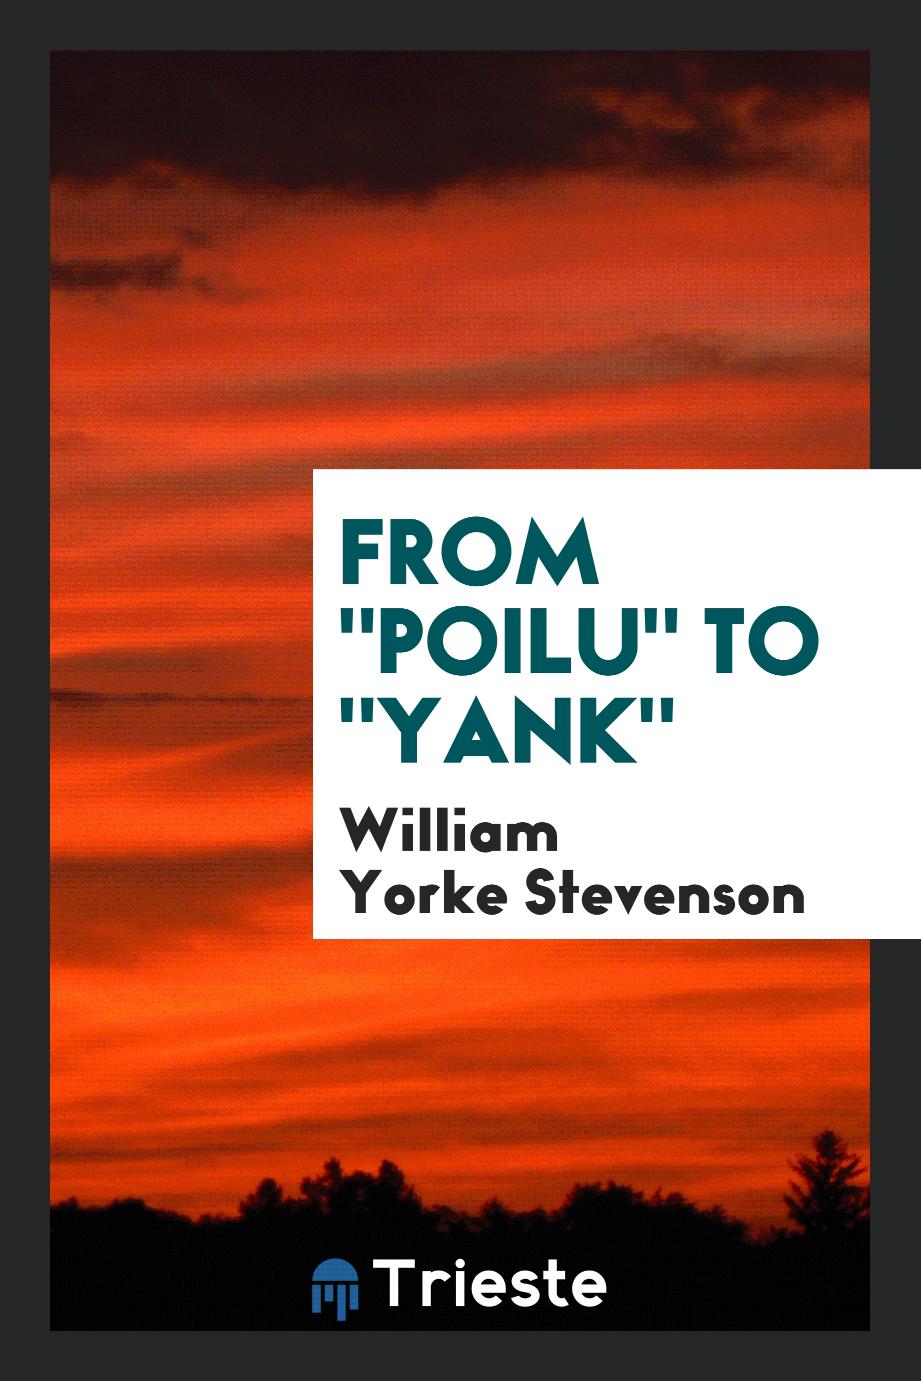 From "Poilu" to "Yank"